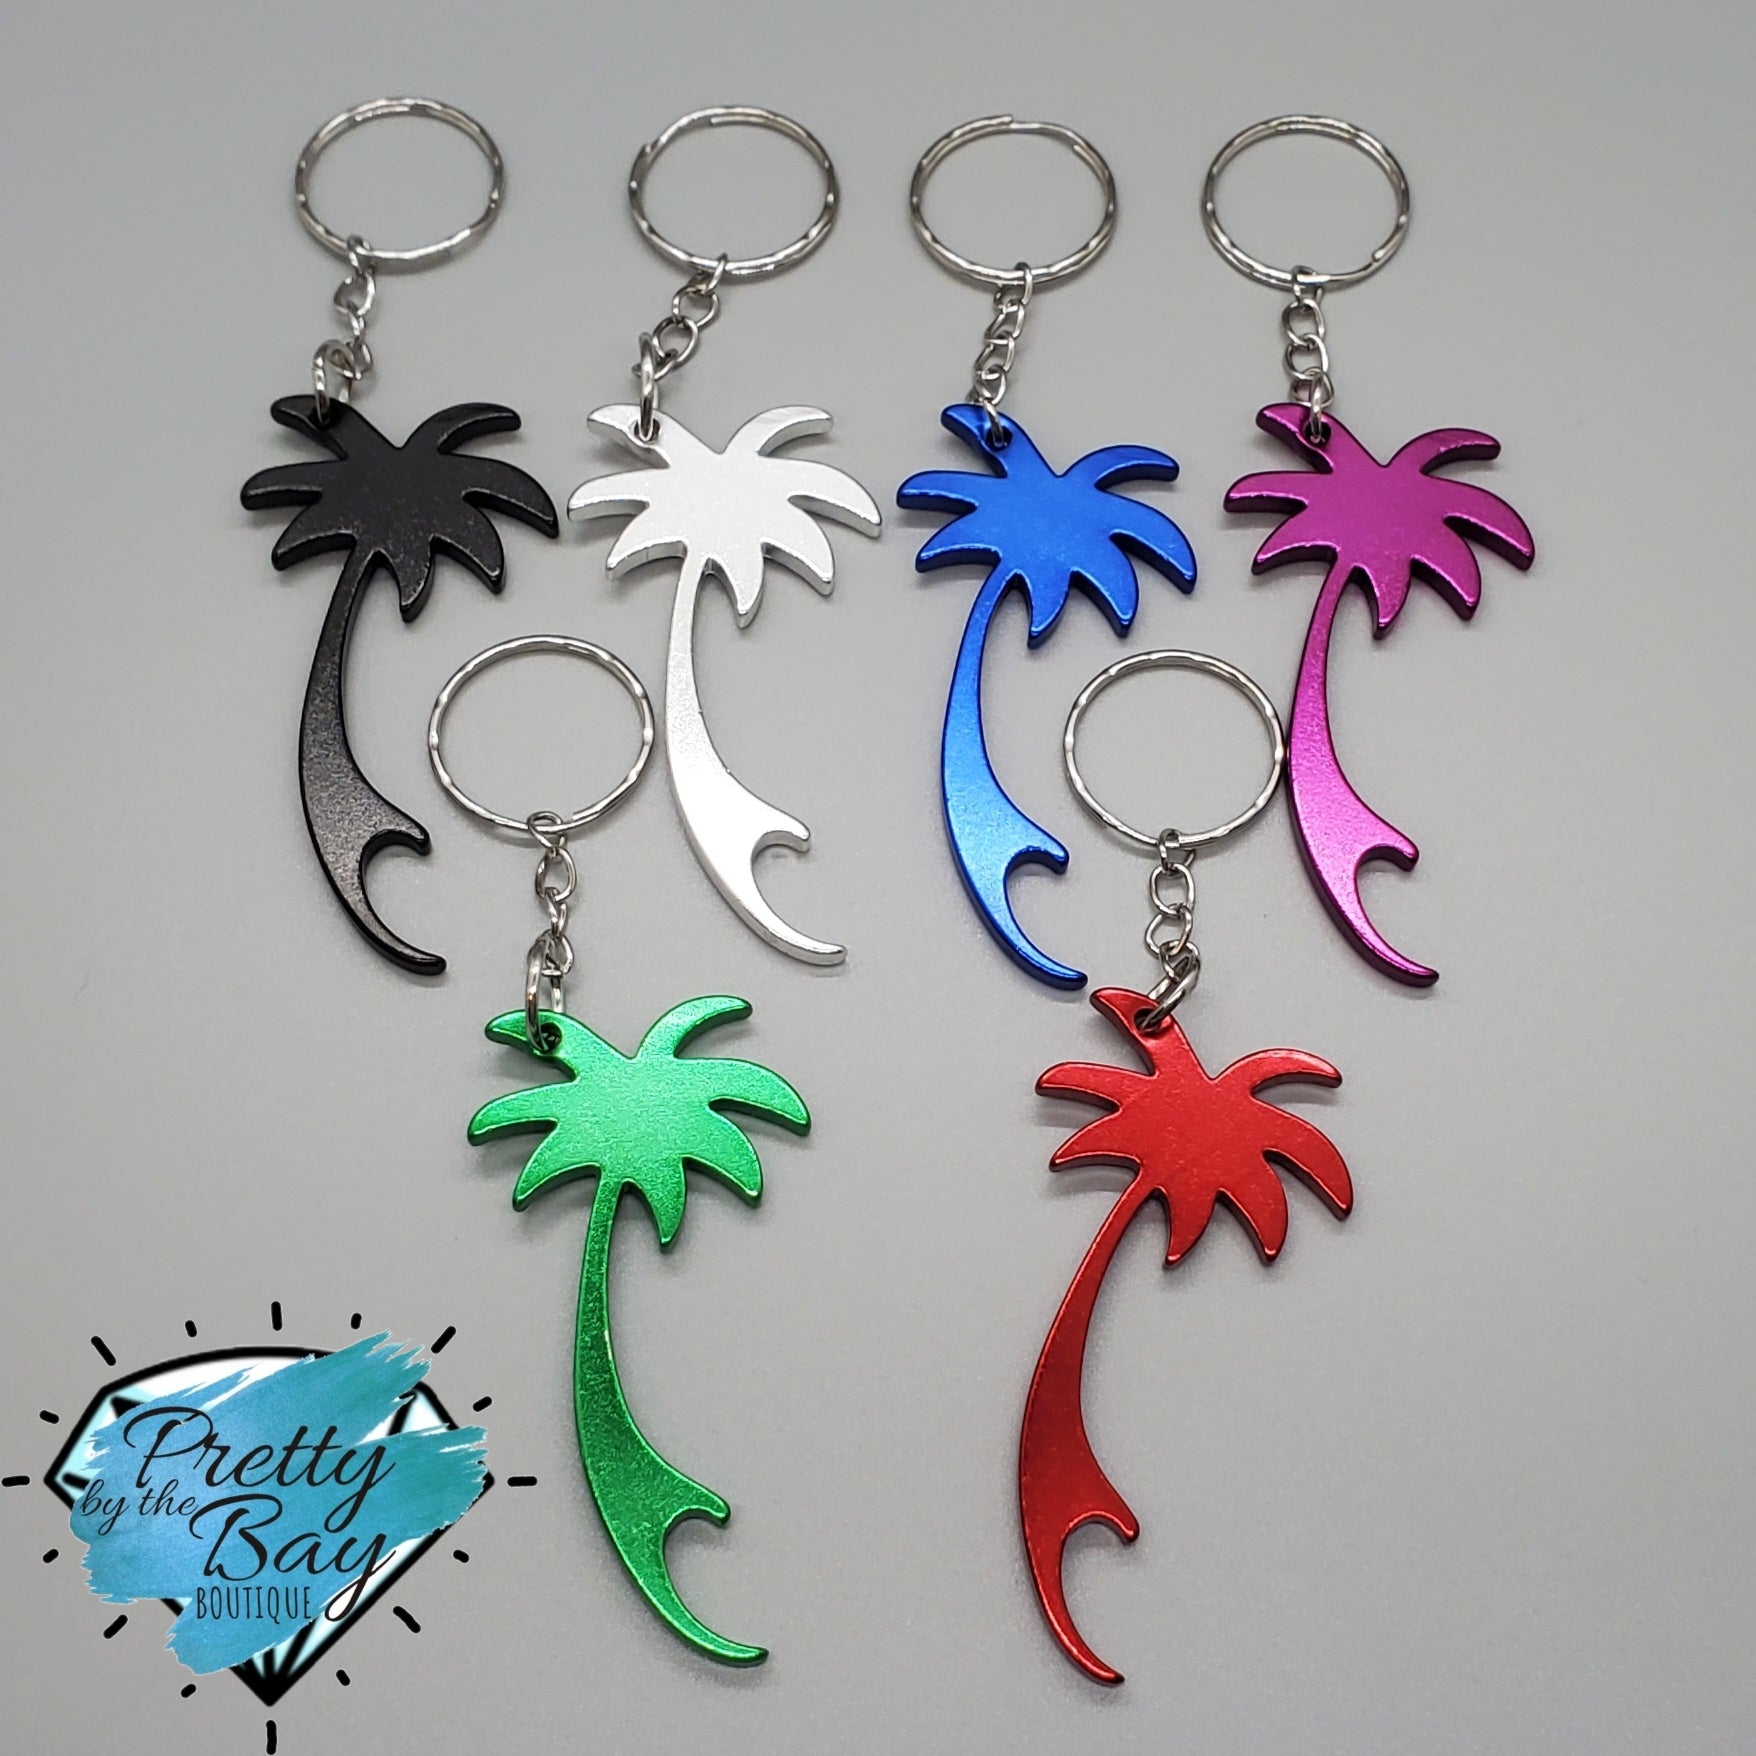 Keychain Accessory Mystery Pods – Pretty by the Bay Boutique